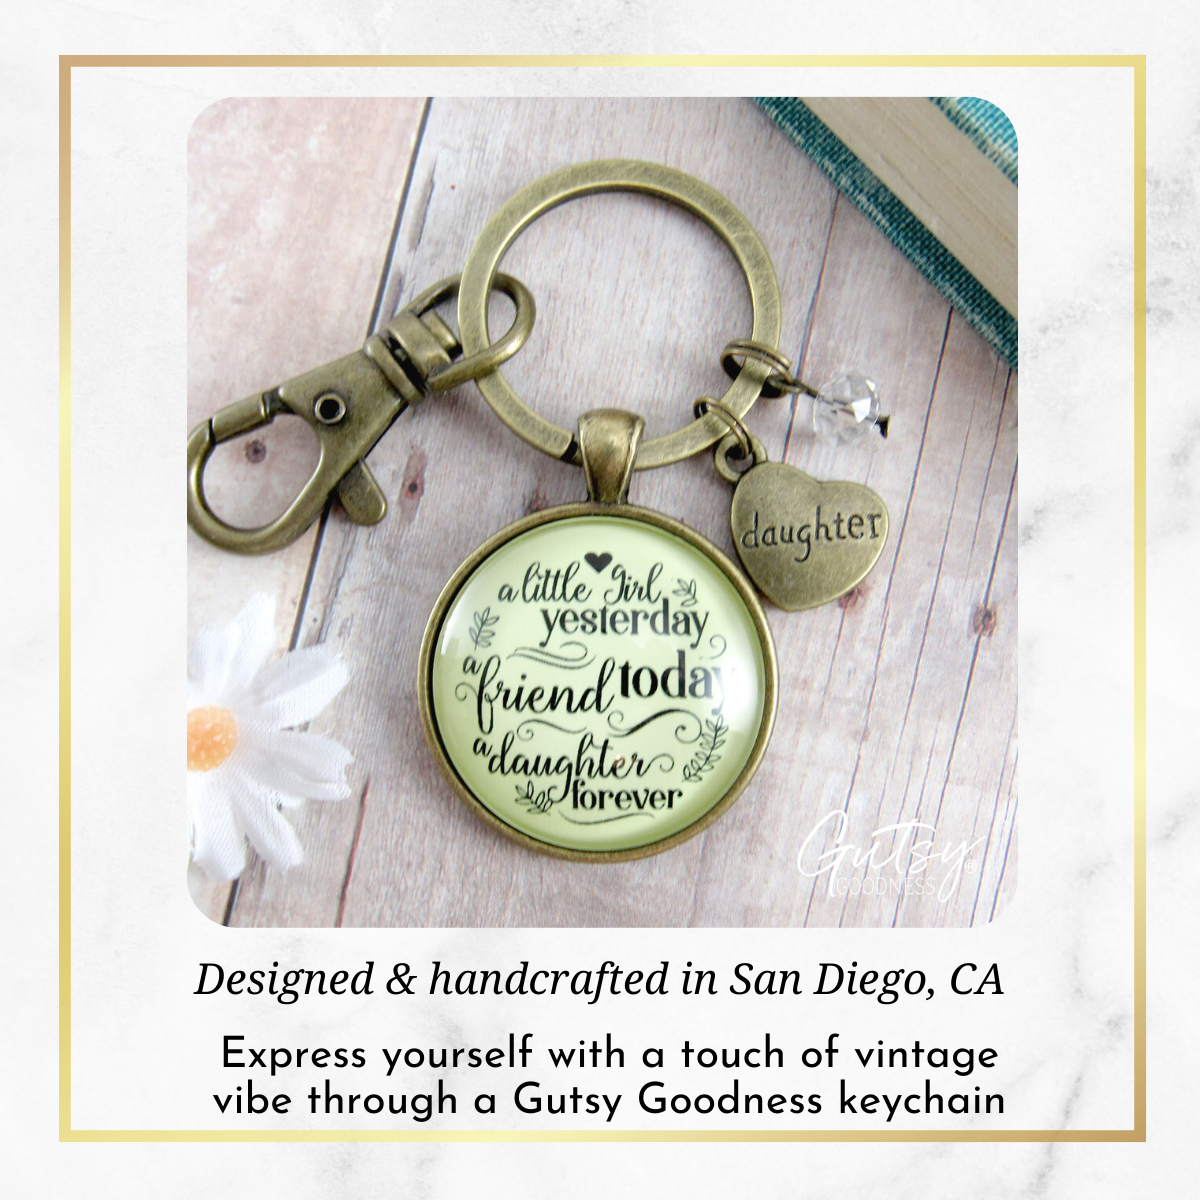 To My Daughter Keychain A Little Girl Yesterday From Mom Inspirational Friendship Jewelry Gift - Gutsy Goodness Handmade Jewelry;To My Daughter Keychain A Little Girl Yesterday From Mom Inspirational Friendship Jewelry Gift - Gutsy Goodness Handmade Jewelry Gifts